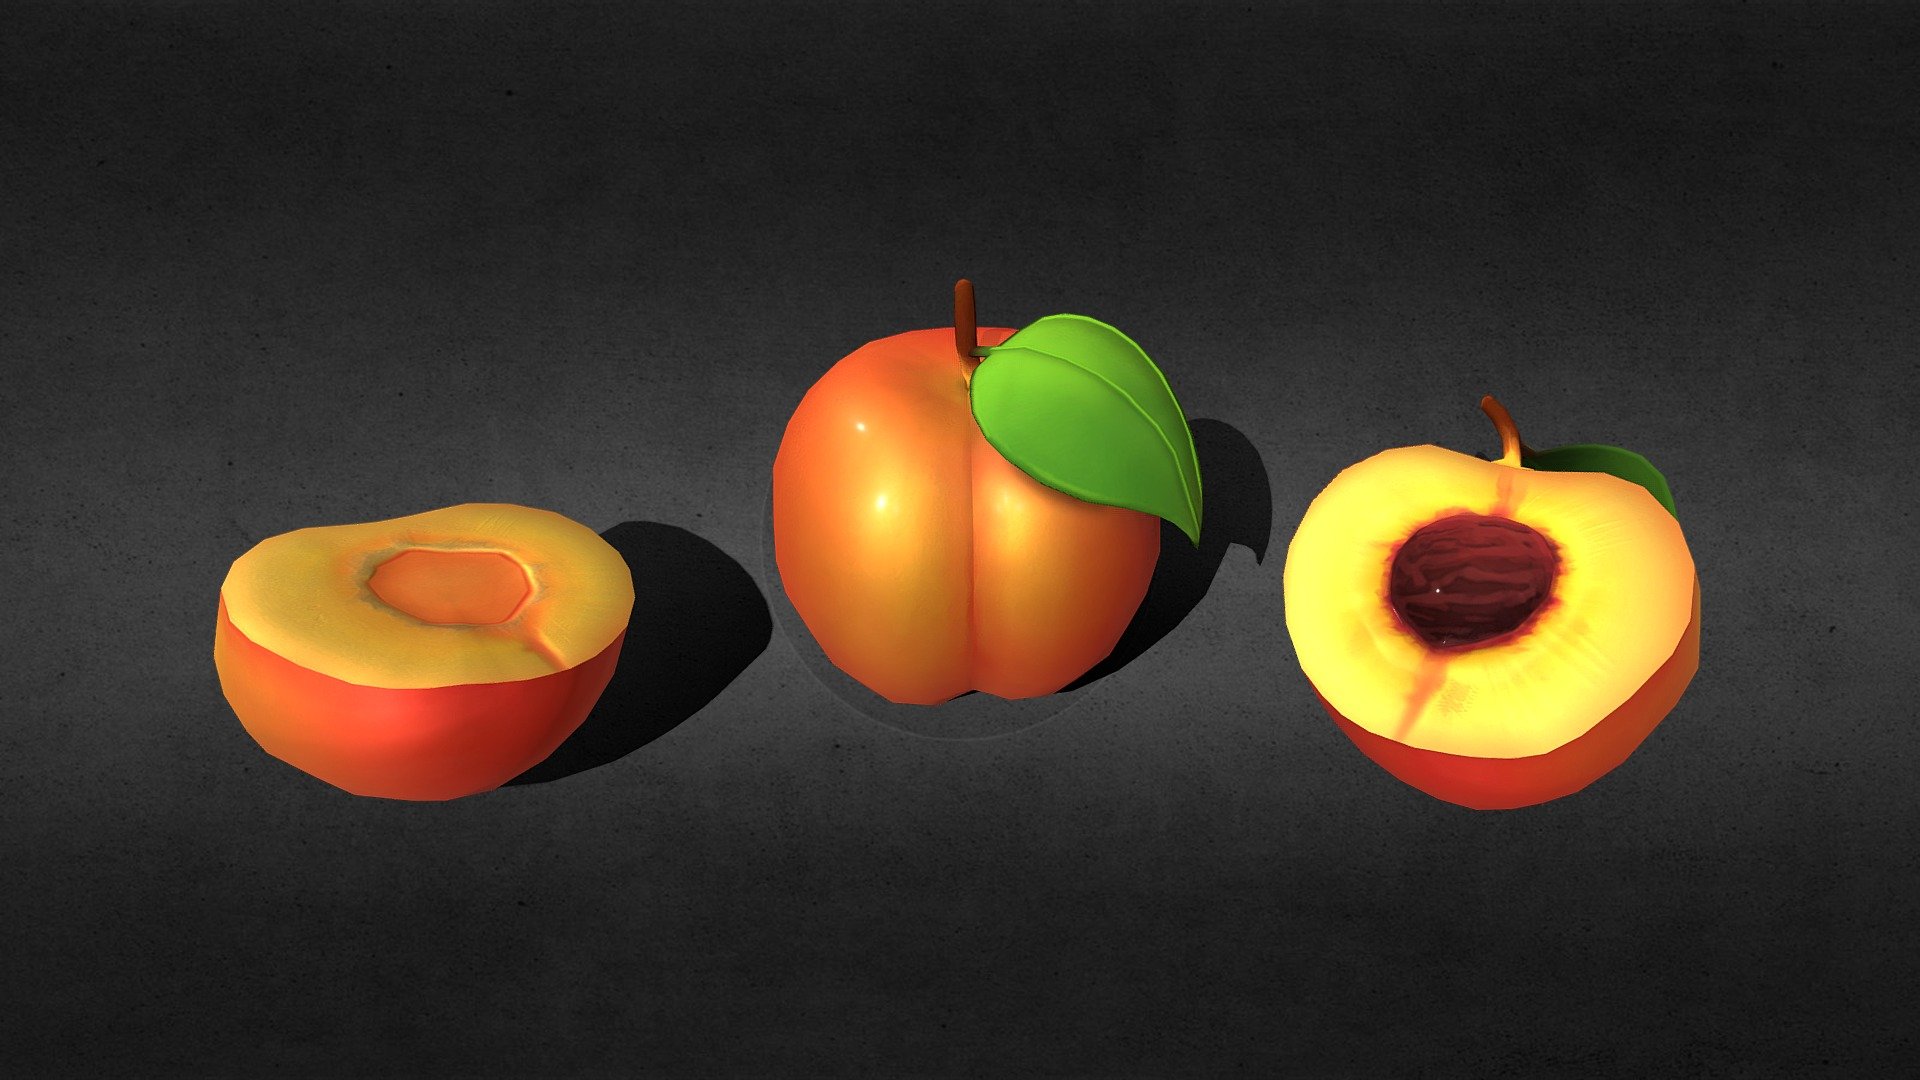 Peach Sliced Fruit Model with Leaf.

Object is made of clean geometry. 
All parts of the model are in the real world scale,
Mmodel can be put simply in your scene or game.

Textures:
Diffuse color map,
Roughness map,
Normal map.
All textures are 1024x1024px resolution for peach body 3d model